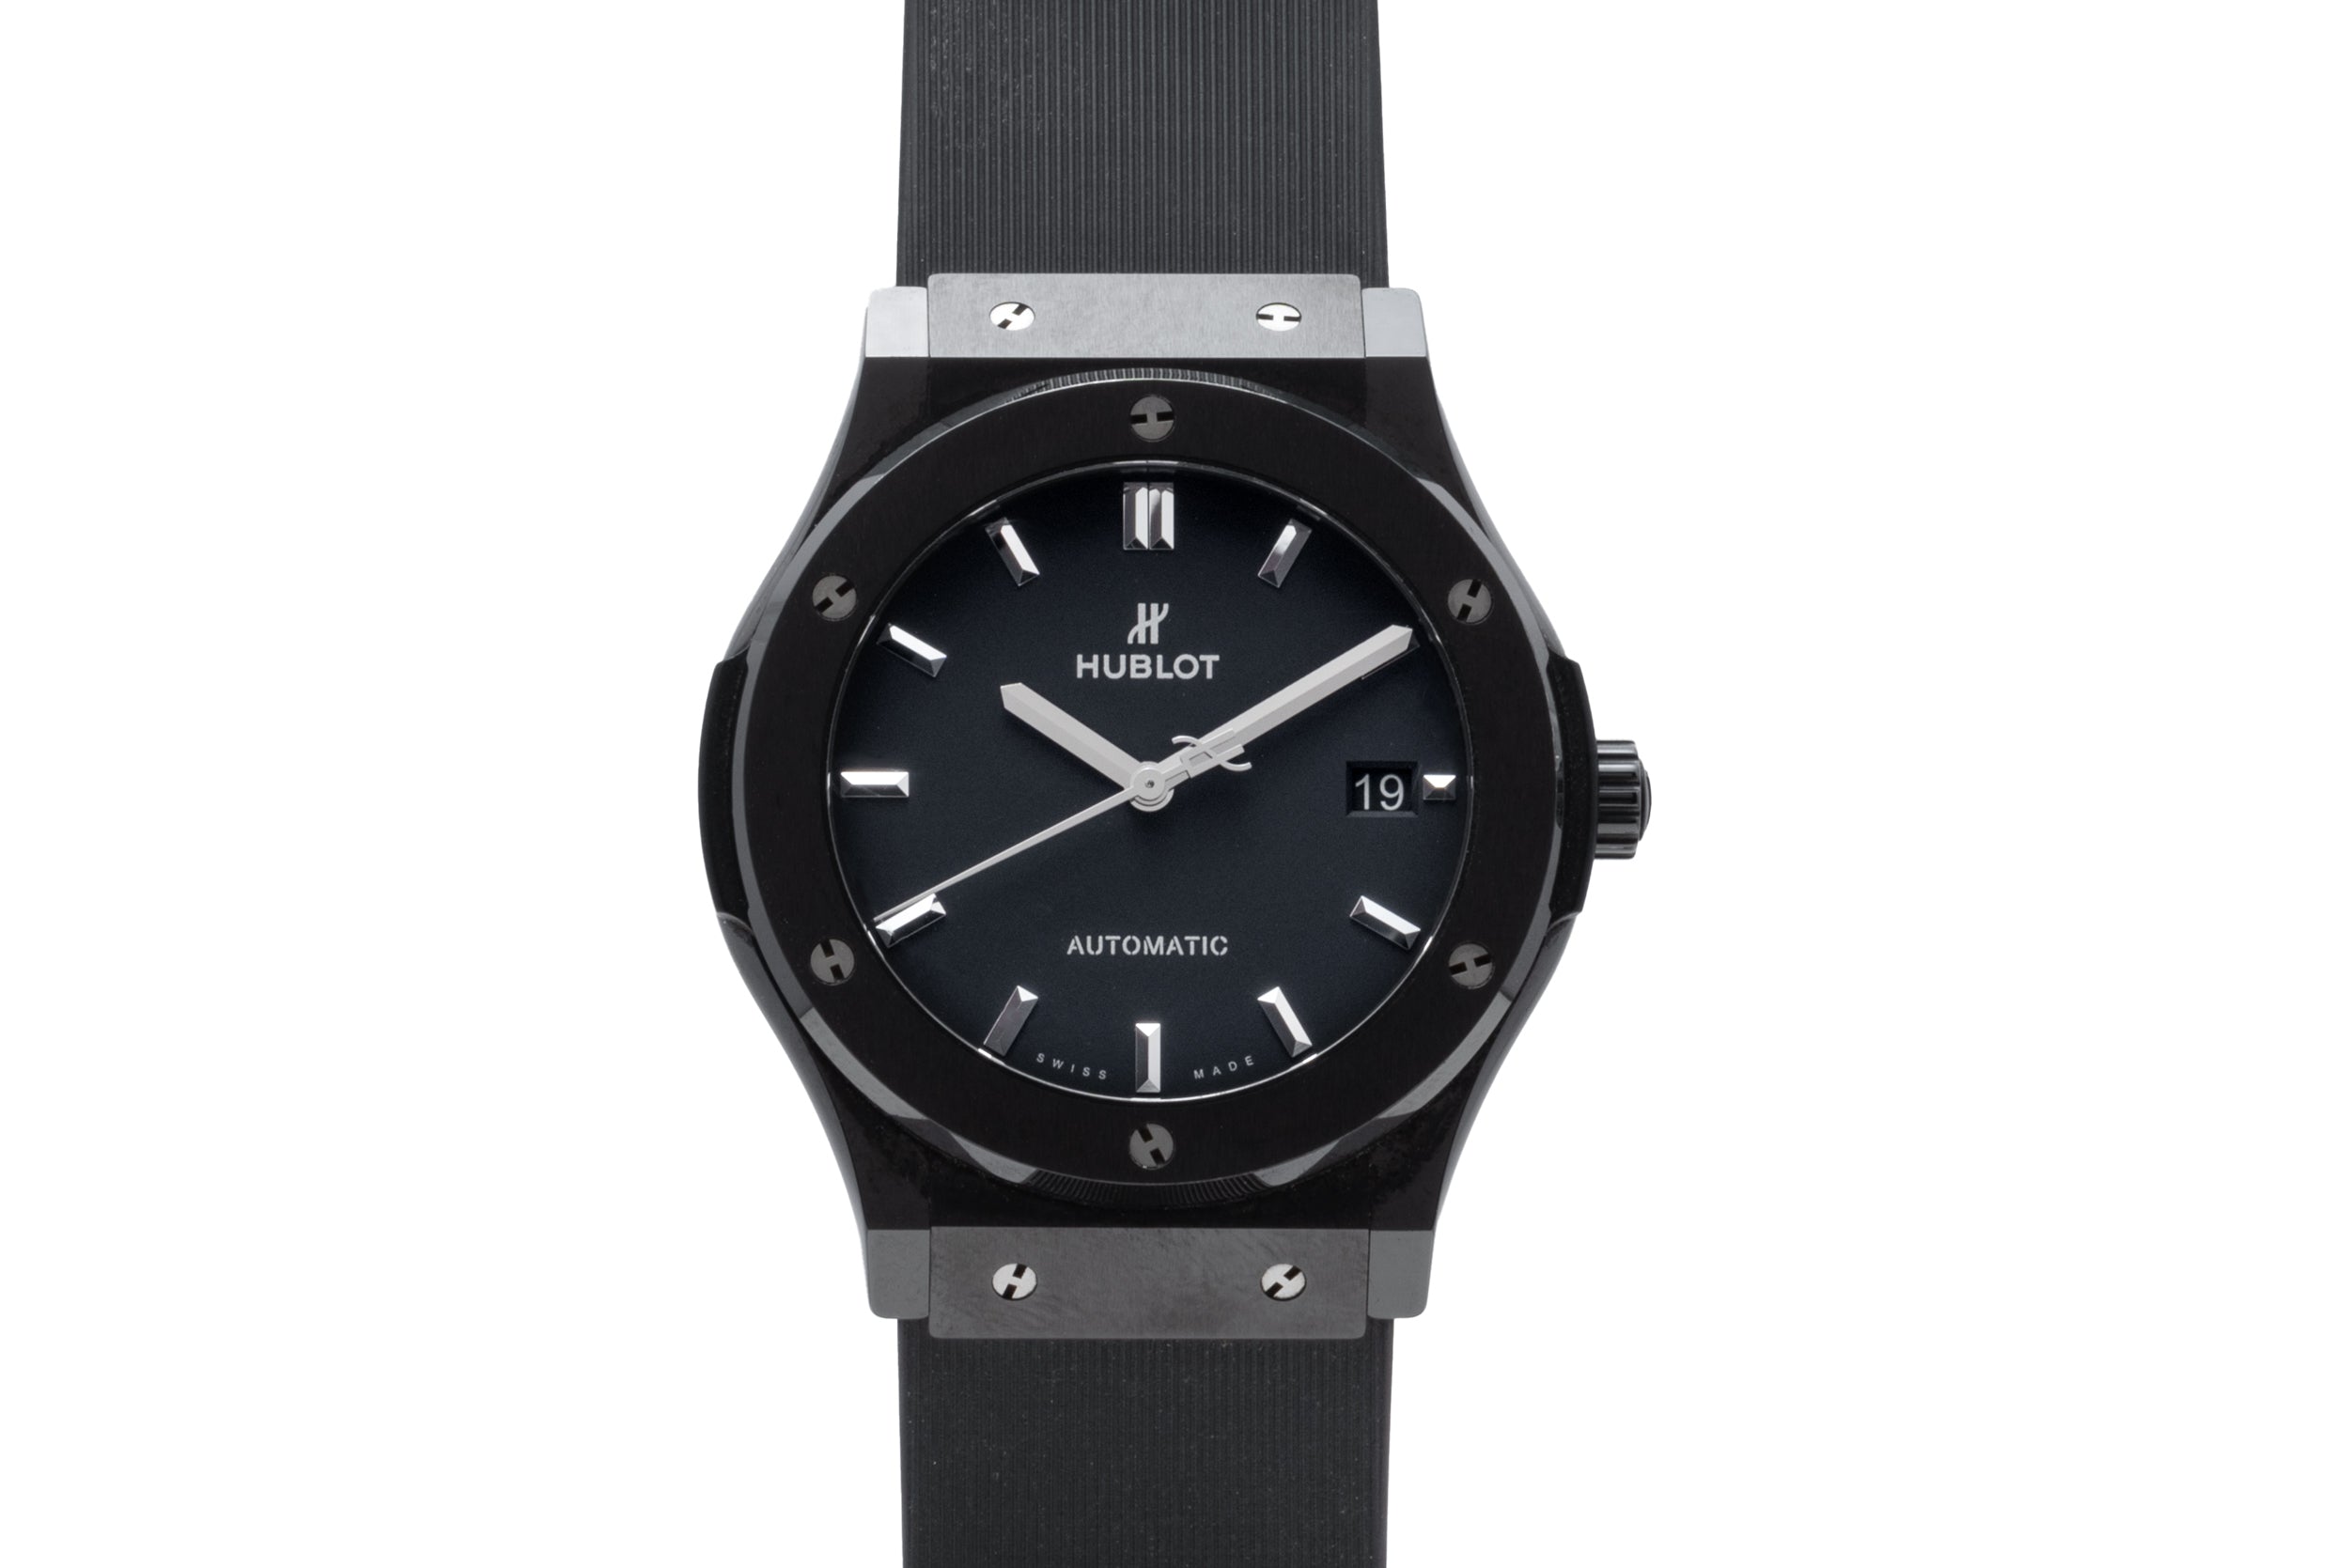 Hublot Classic Fusion Black Magic for $10,651 for sale from a Seller on  Chrono24